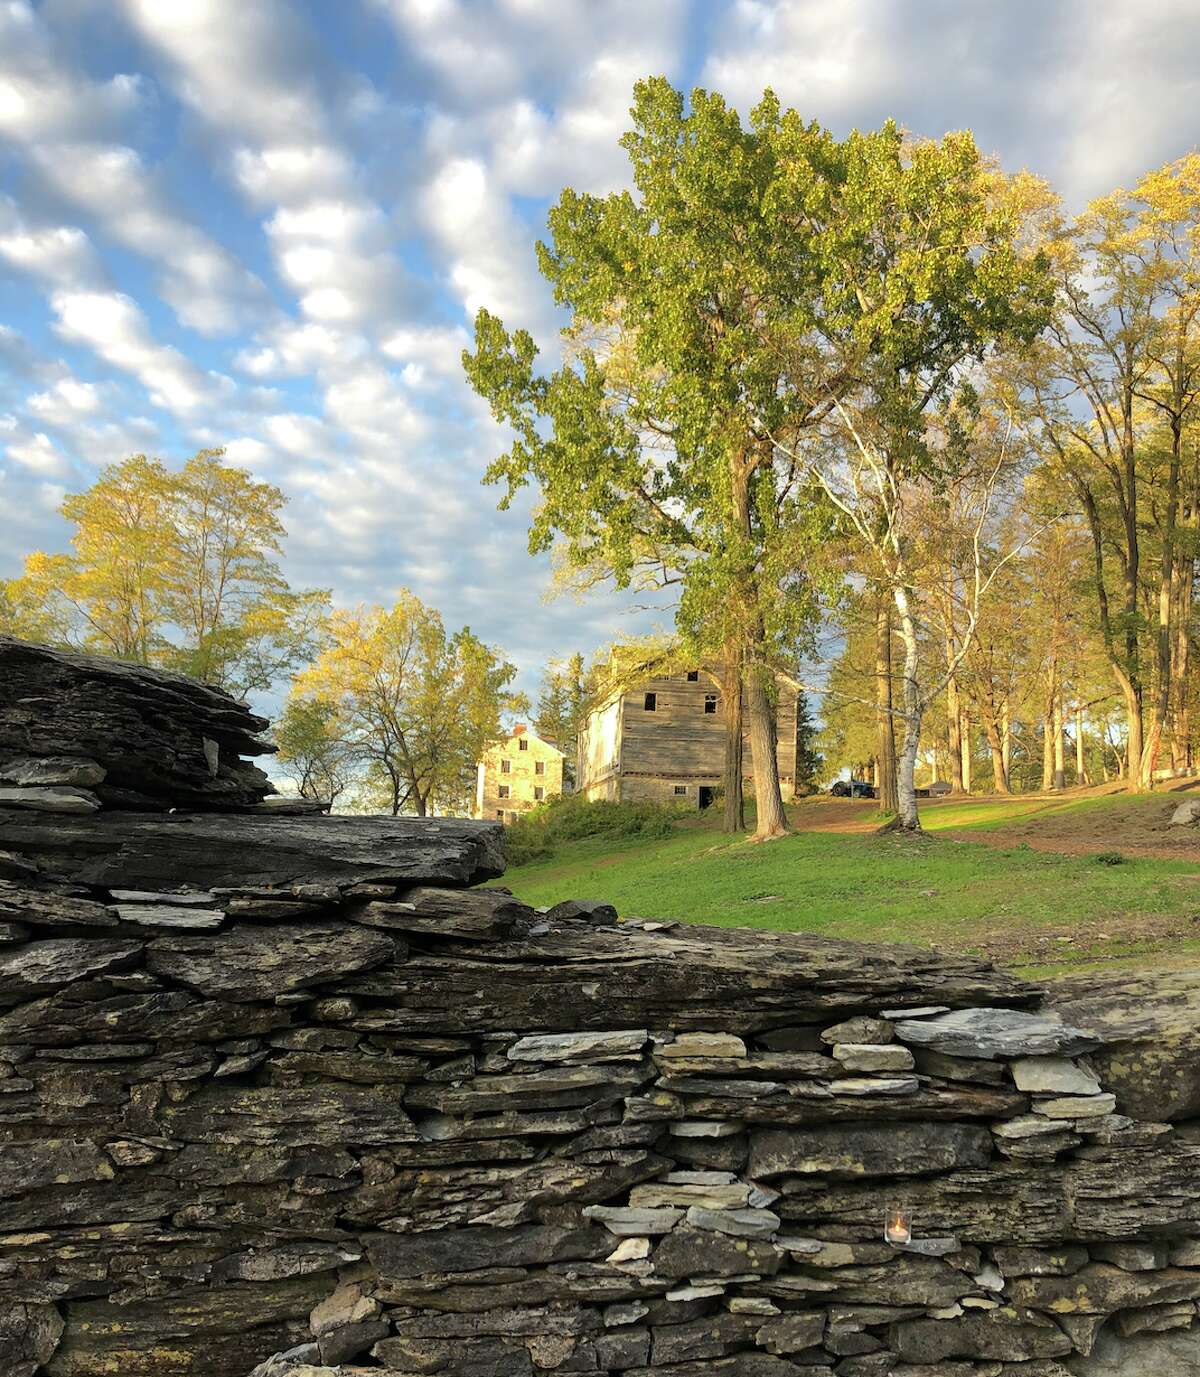 Throughout the 1800s and early 1900s, this 78-acre property in New Lebanon, now called Ruins at Sassafras Farm, was part of the Second Family community at Mount Lebanon, the Shakers’ holiest site. 